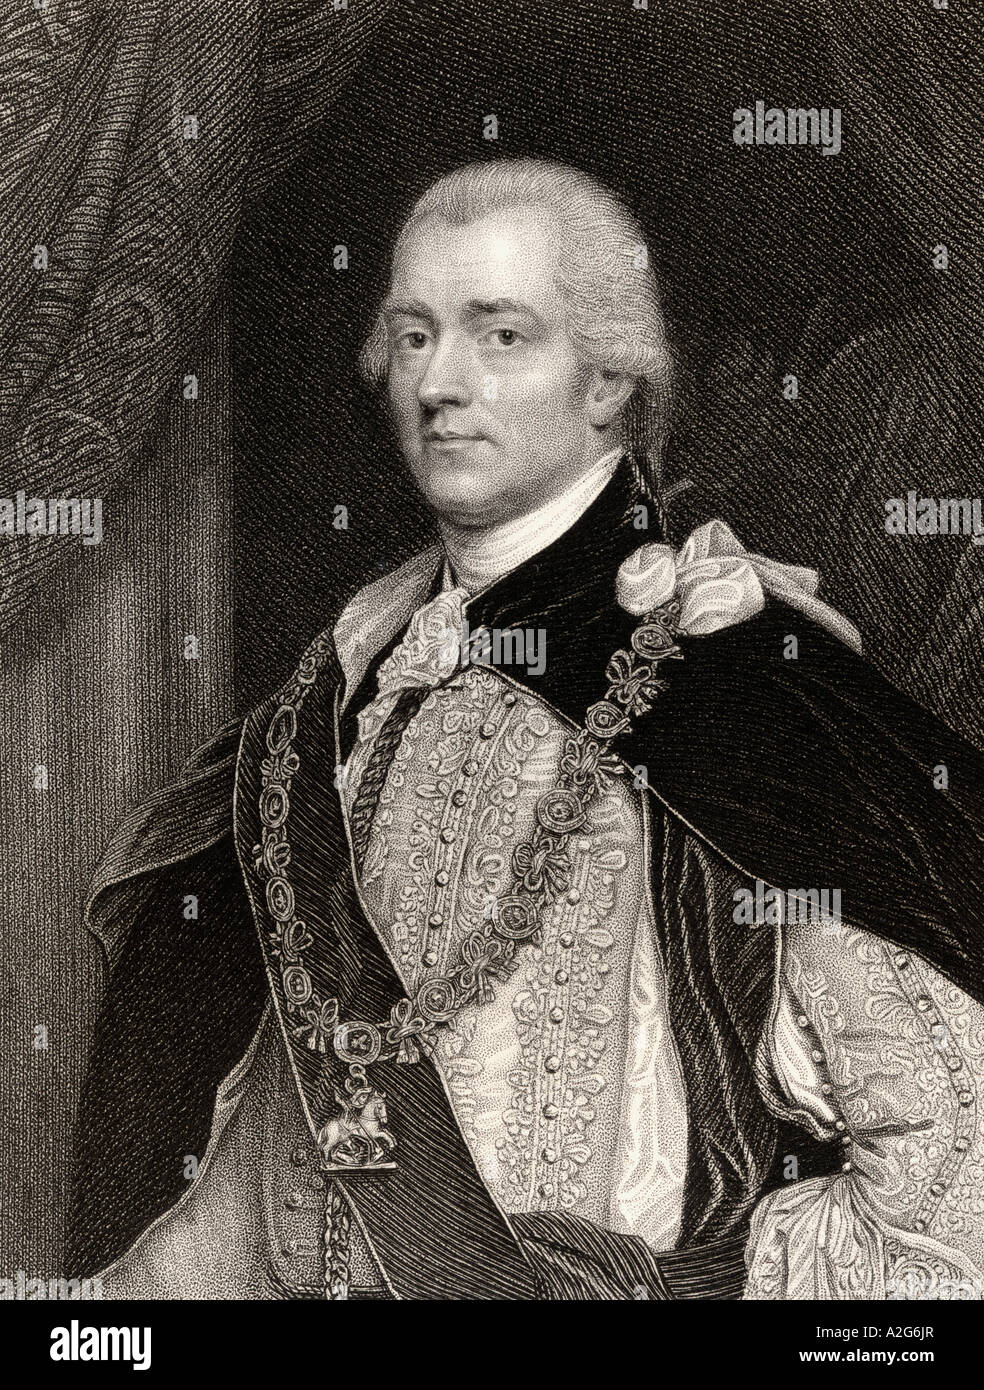 George John Spencer, 2nd Earl Spencer, 1758 - 1834. British Whig politician. Stock Photo